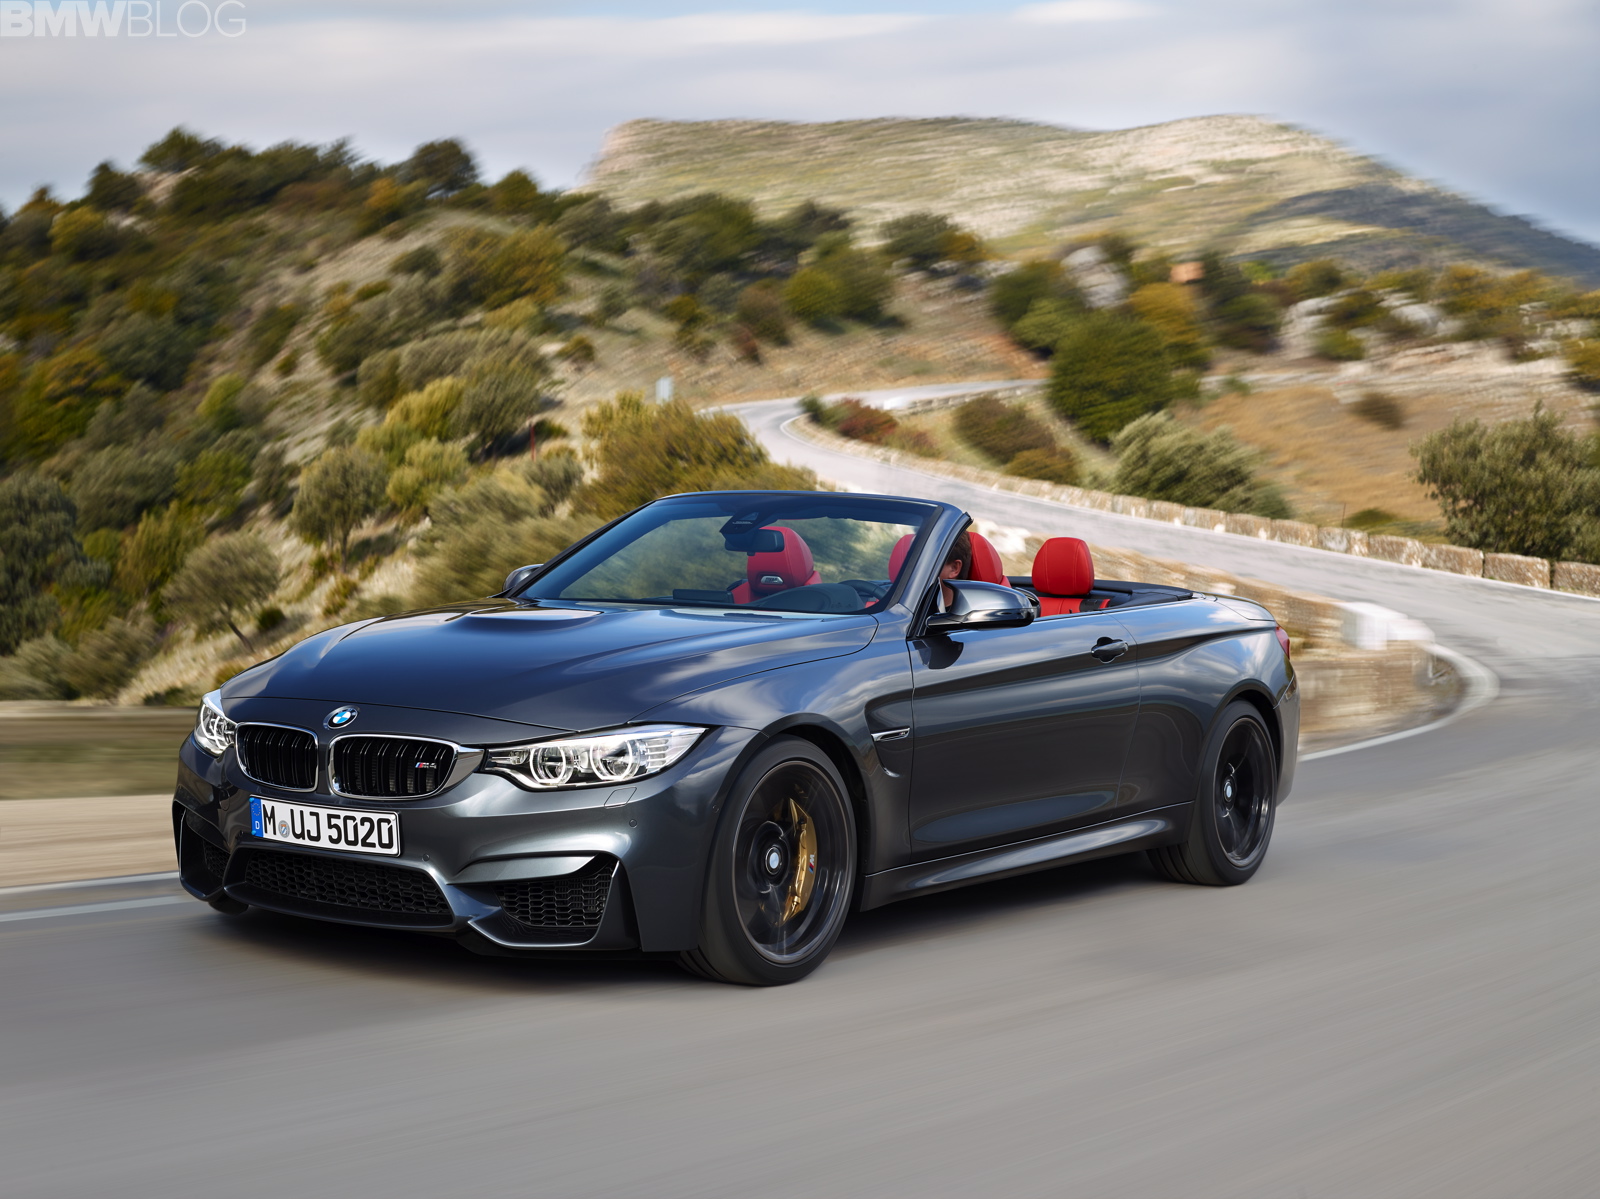 HQ 2015 BMW M4 Cabrio Wallpapers | File 531.11Kb